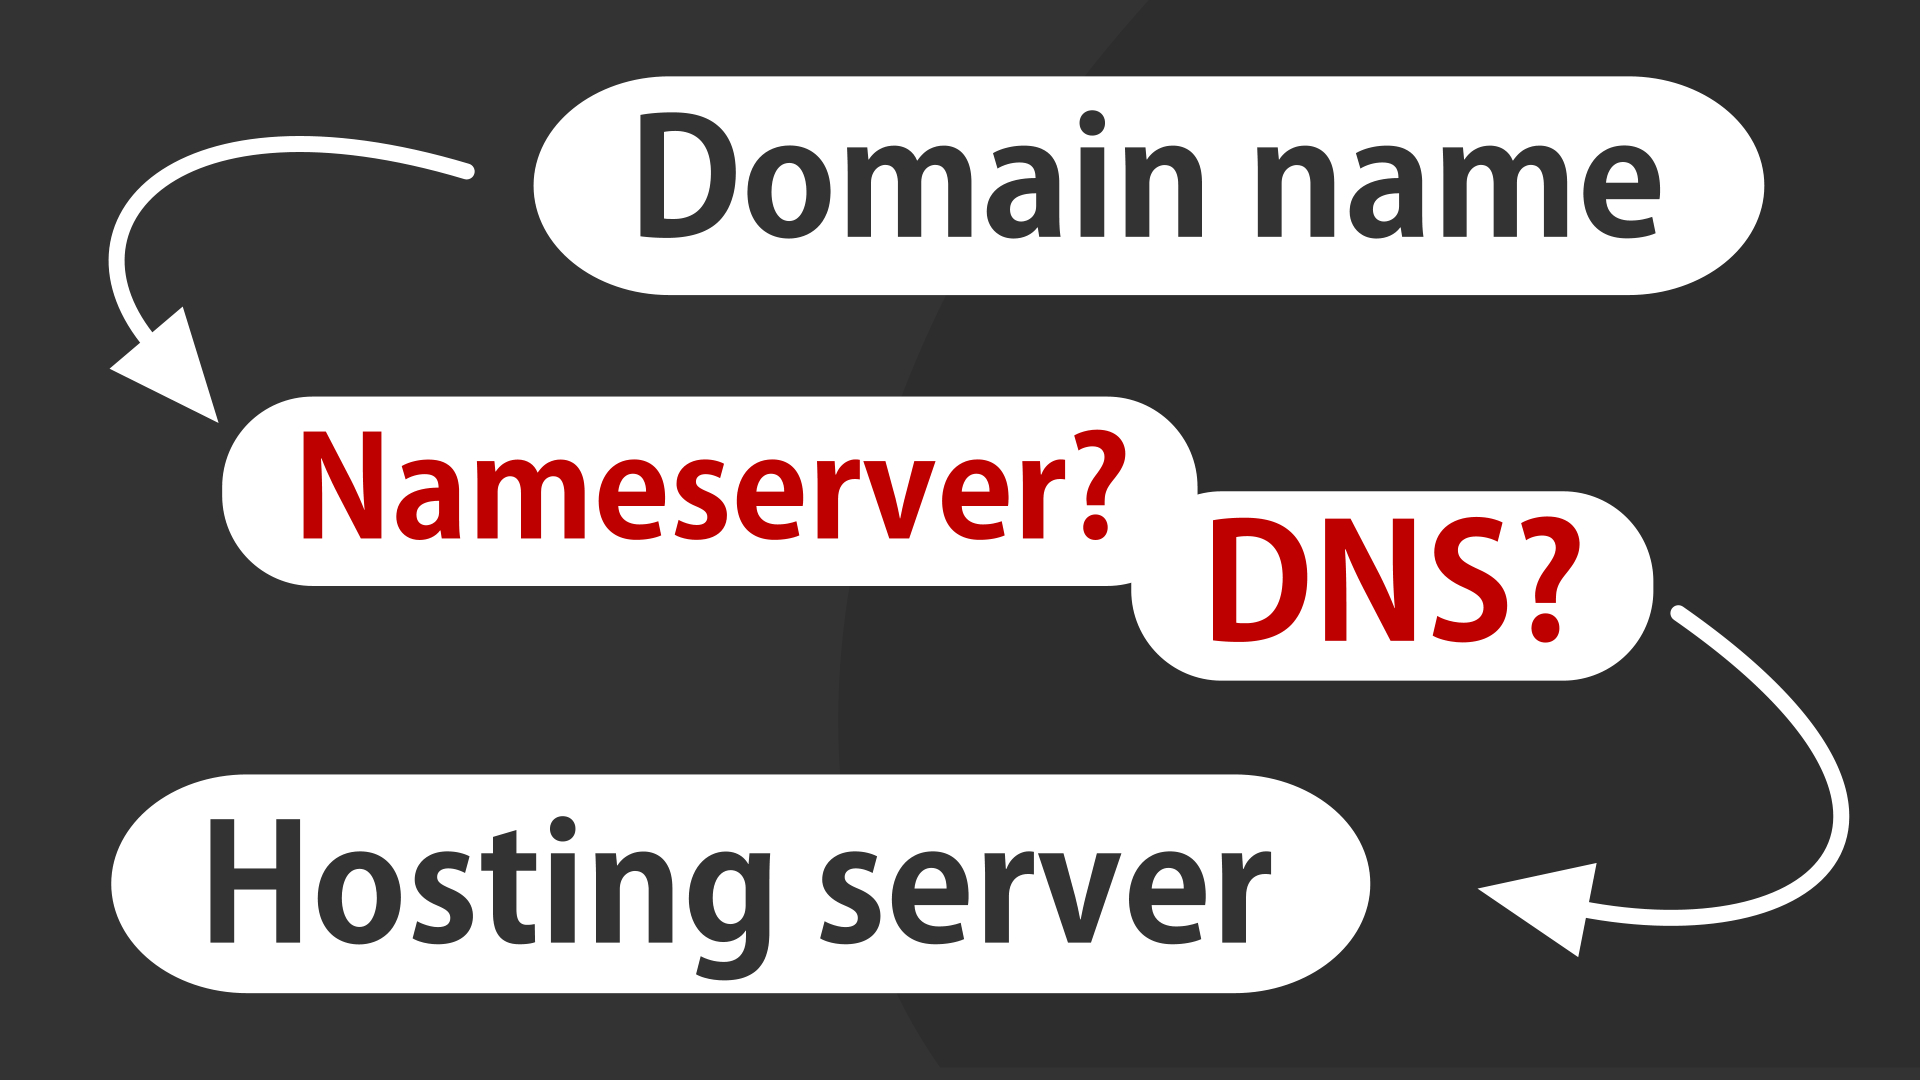 What is DNS? What are nameservers? What is their role in my domain name and website?